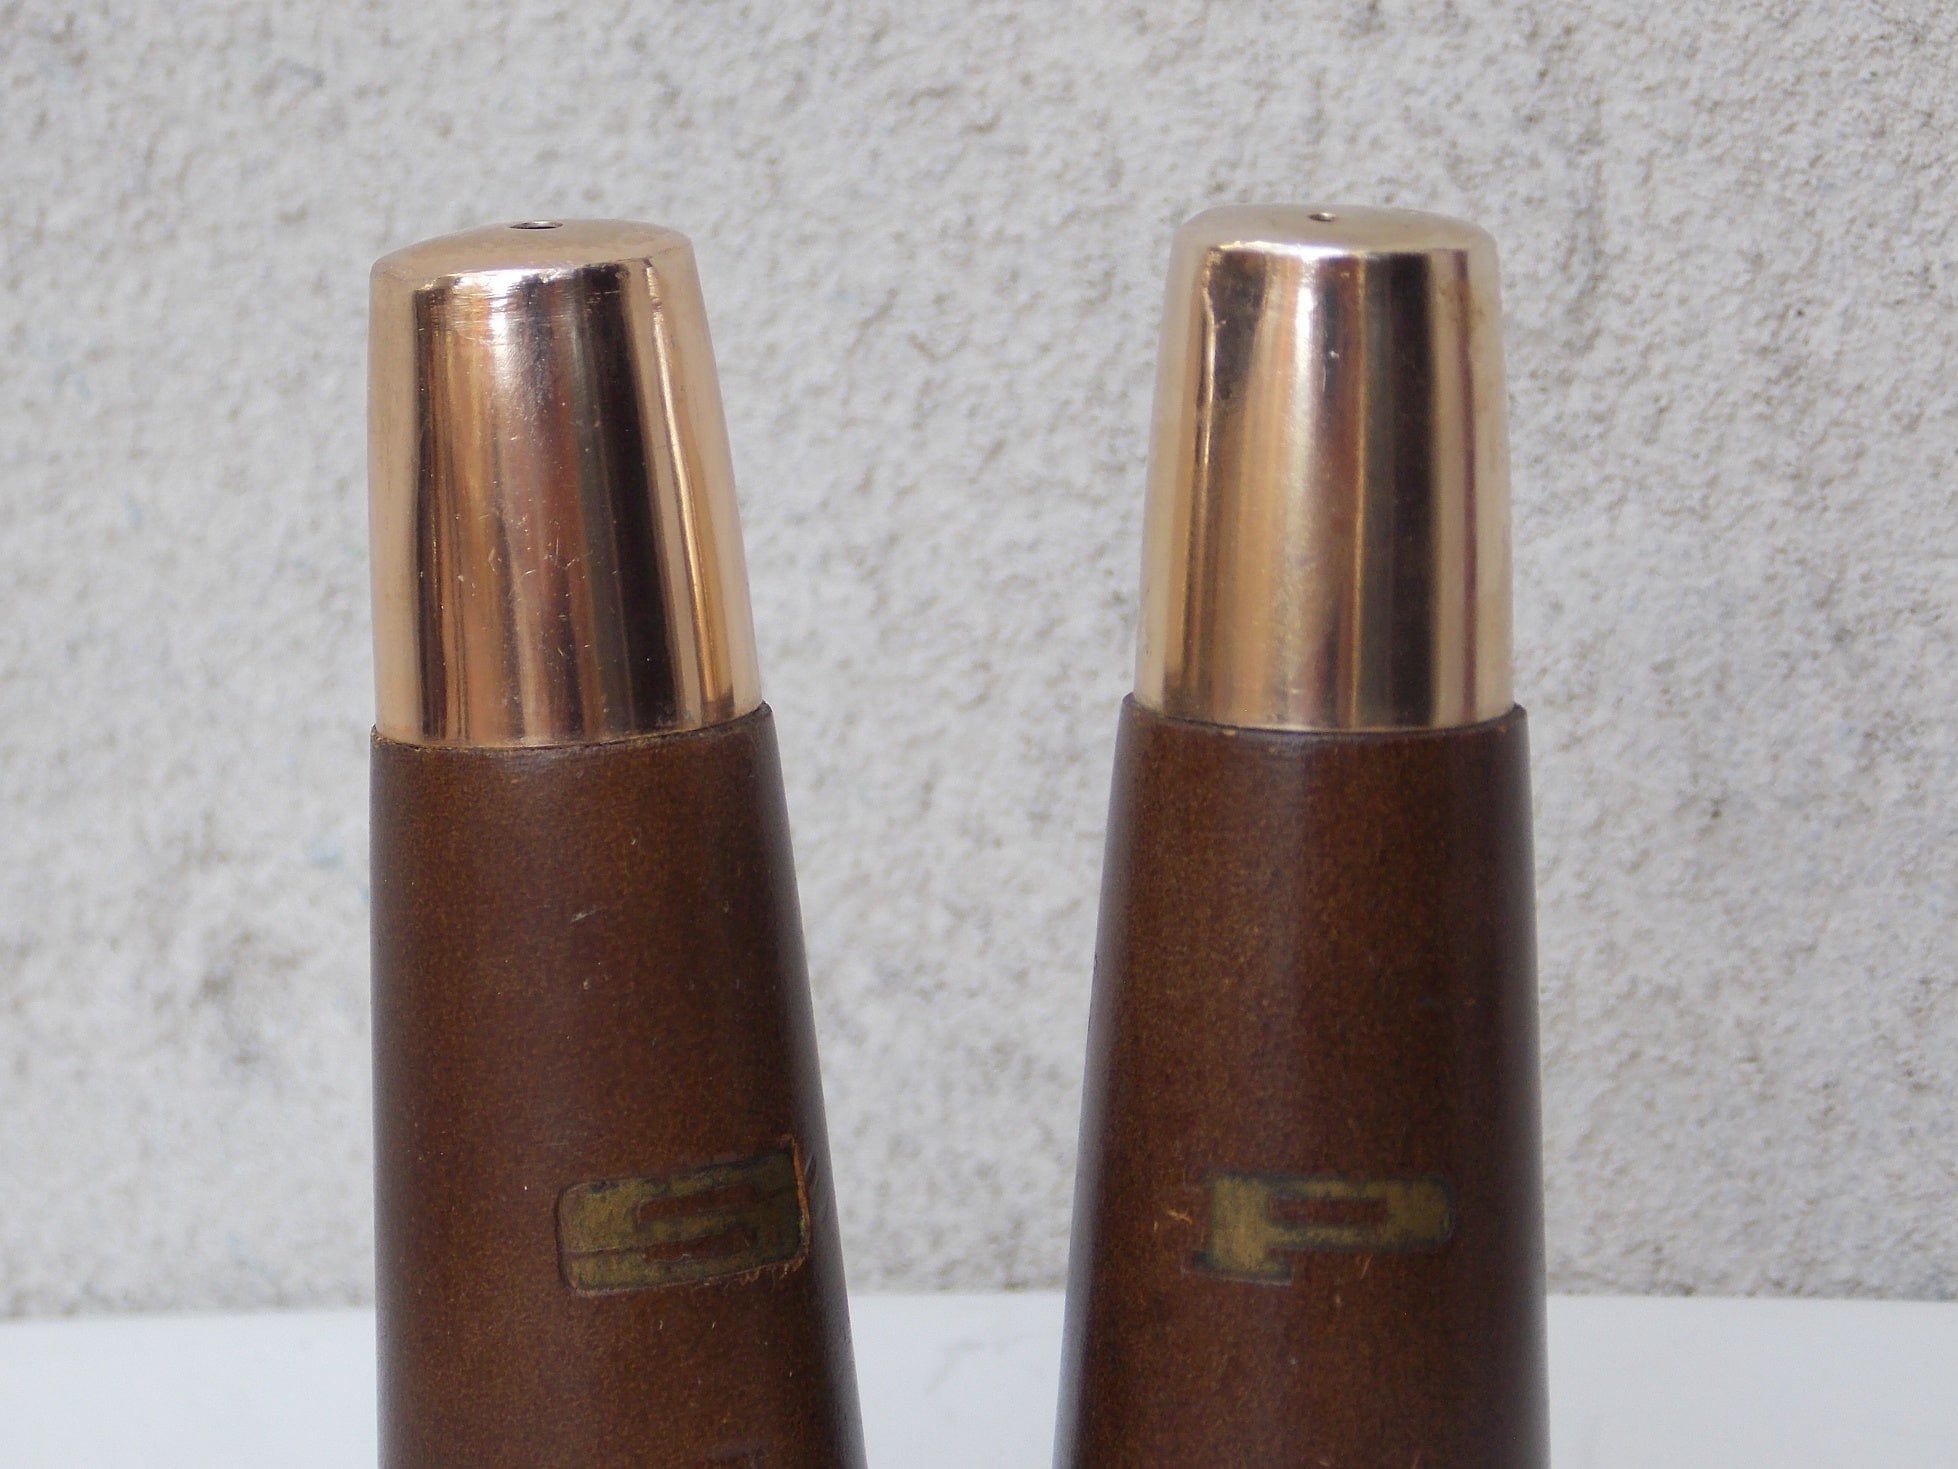 I Like Mike's Mid Century Modern Accessories Mid Century Brown Gold Salt & Pepper Shakers, Wood, Made in Japan